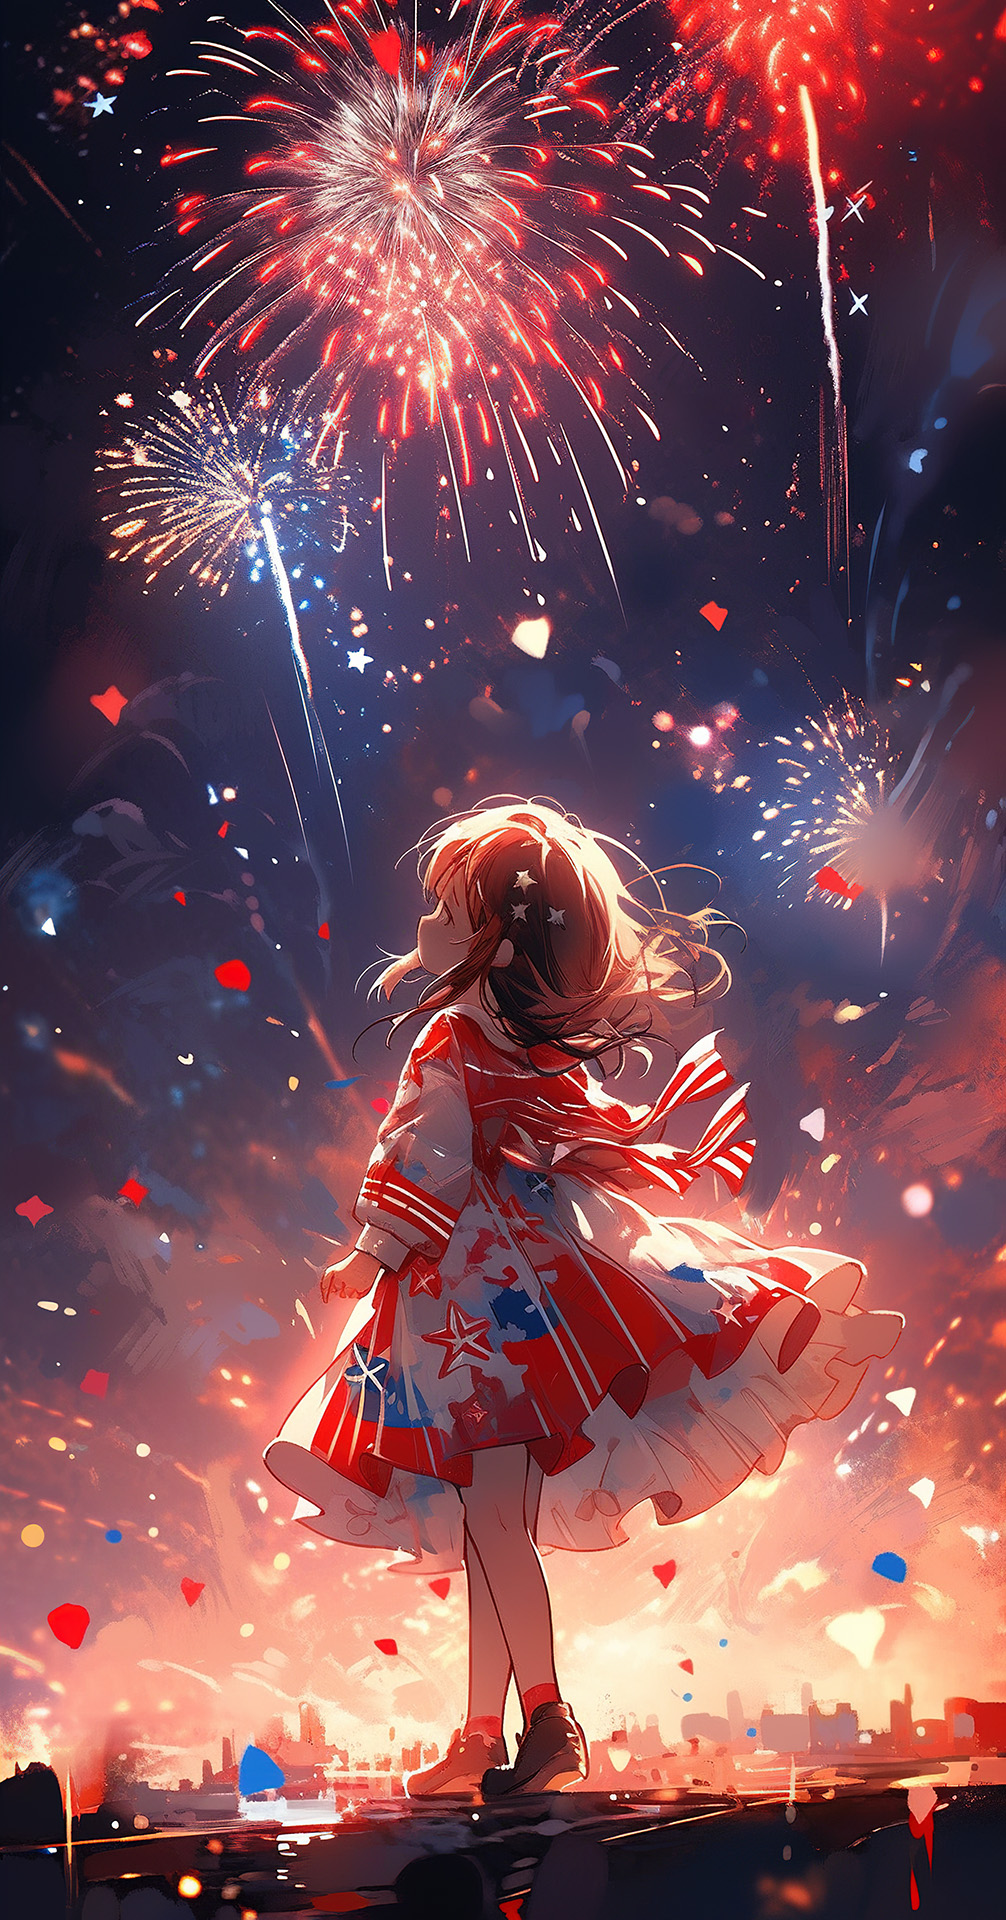 Stars, Stripes, and Wonder: A Young Girl's Celebration